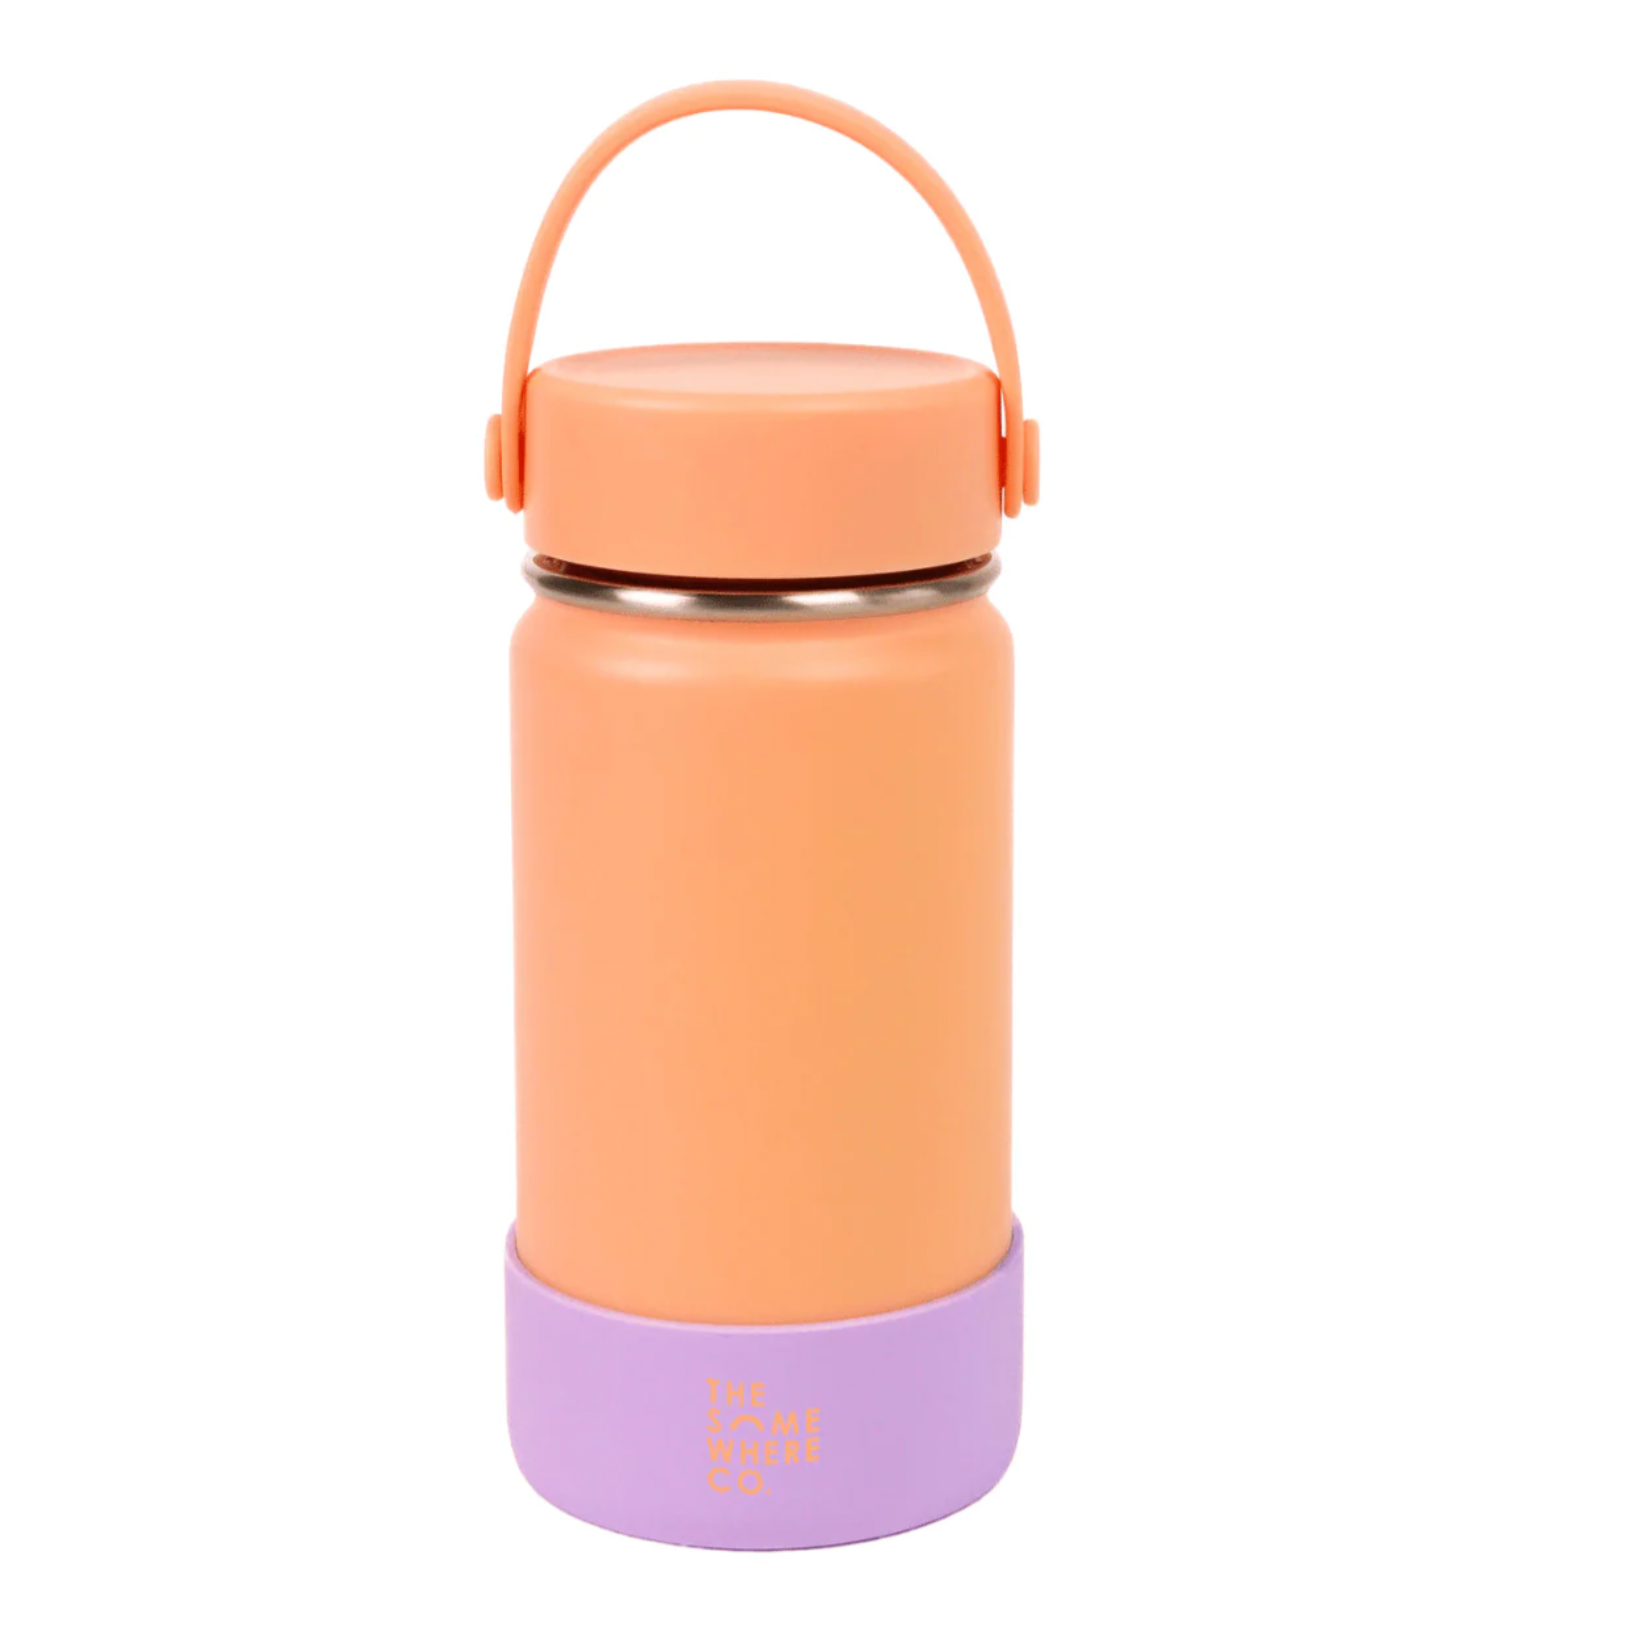 THE SOMEWHERE CO LADY MARMALADE WATER BOTTLE 350ML